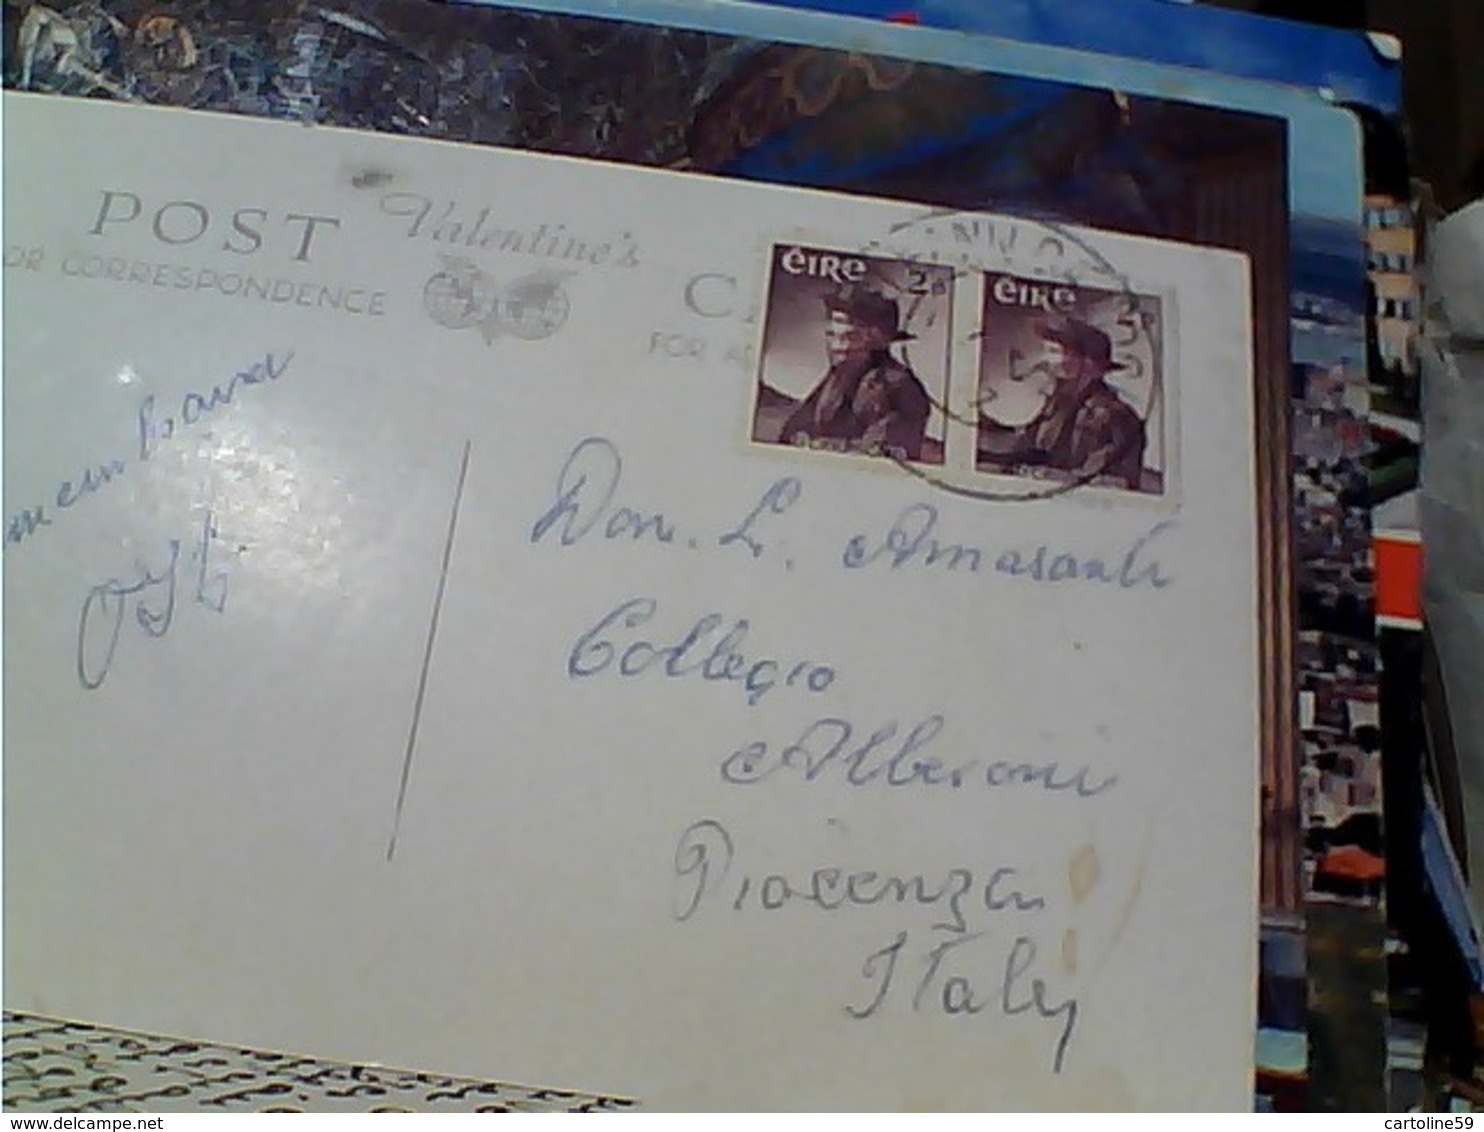 EIRE  GLENDALOUGH Wicklow St. Kevin's Church Round Tower  STAMP TIMBRE SELO 1957 O CRIOMCAM 2 P GX5516 - Wicklow